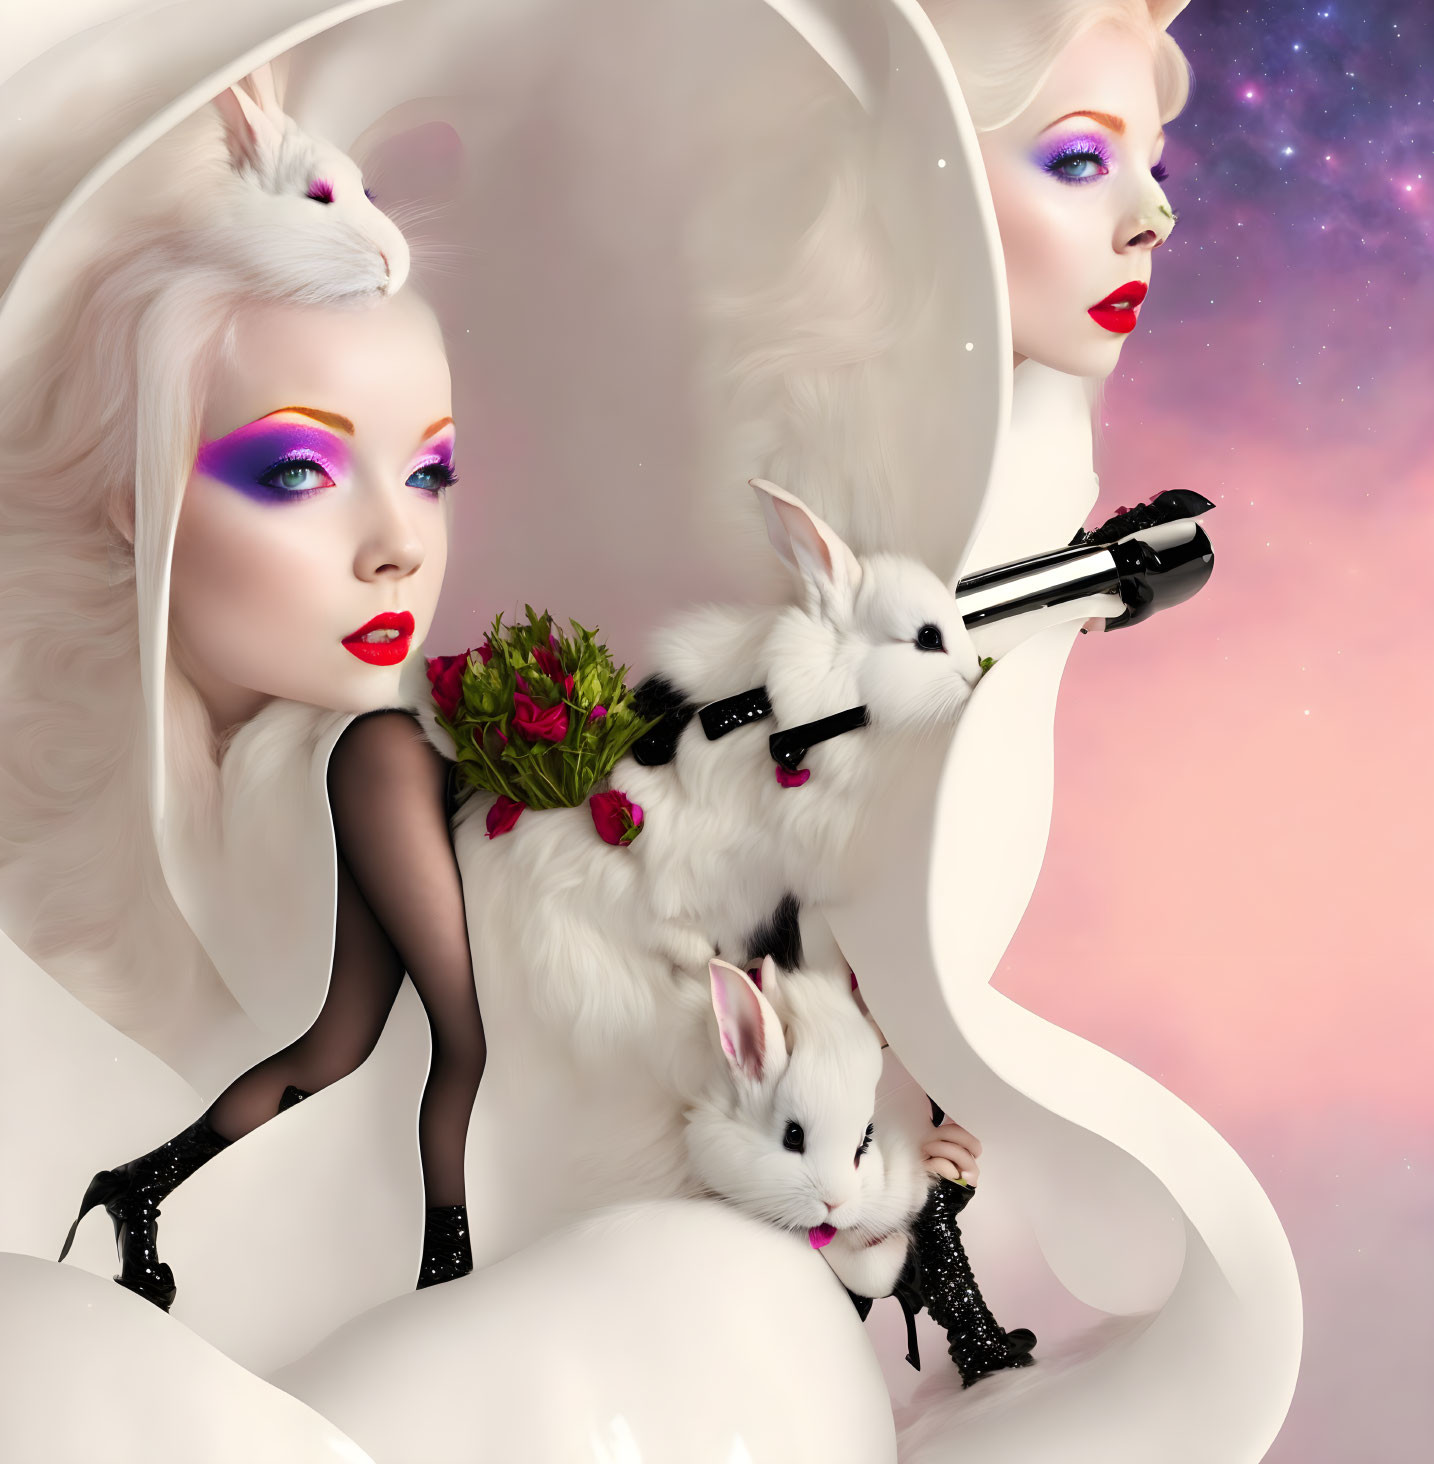 Surreal image: Woman with white hair, vibrant makeup, and rabbits in cosmic setting